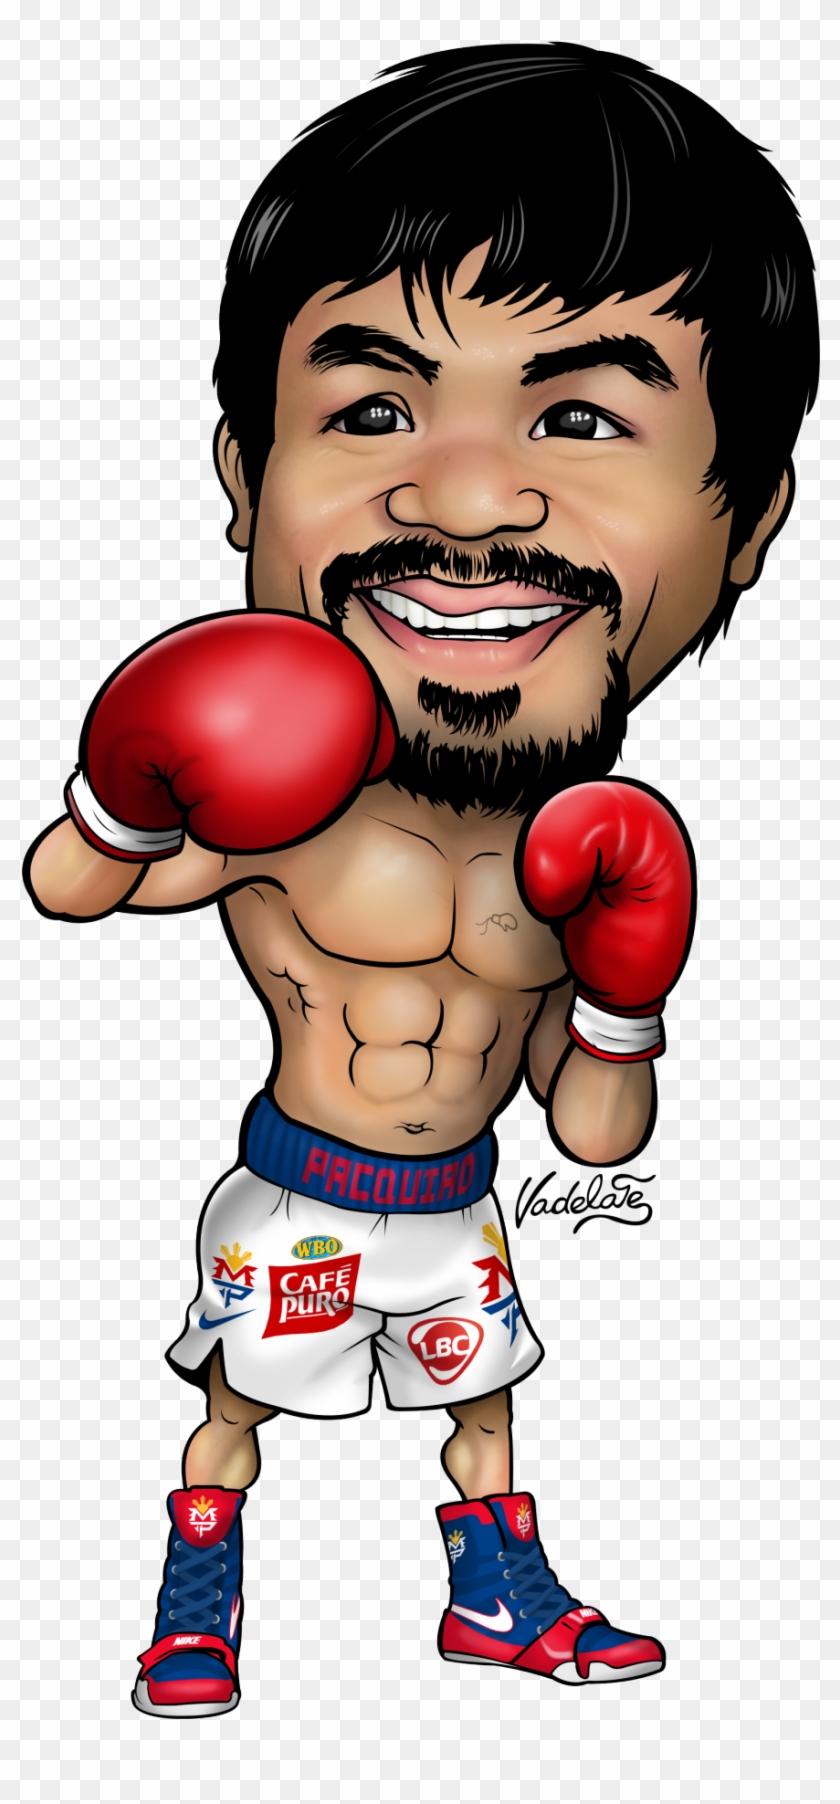 Rbr Boxing Vadelate Caricature Comission Illustration - Rbr Boxing Vadelate Caricature Comission Illustration #1255854